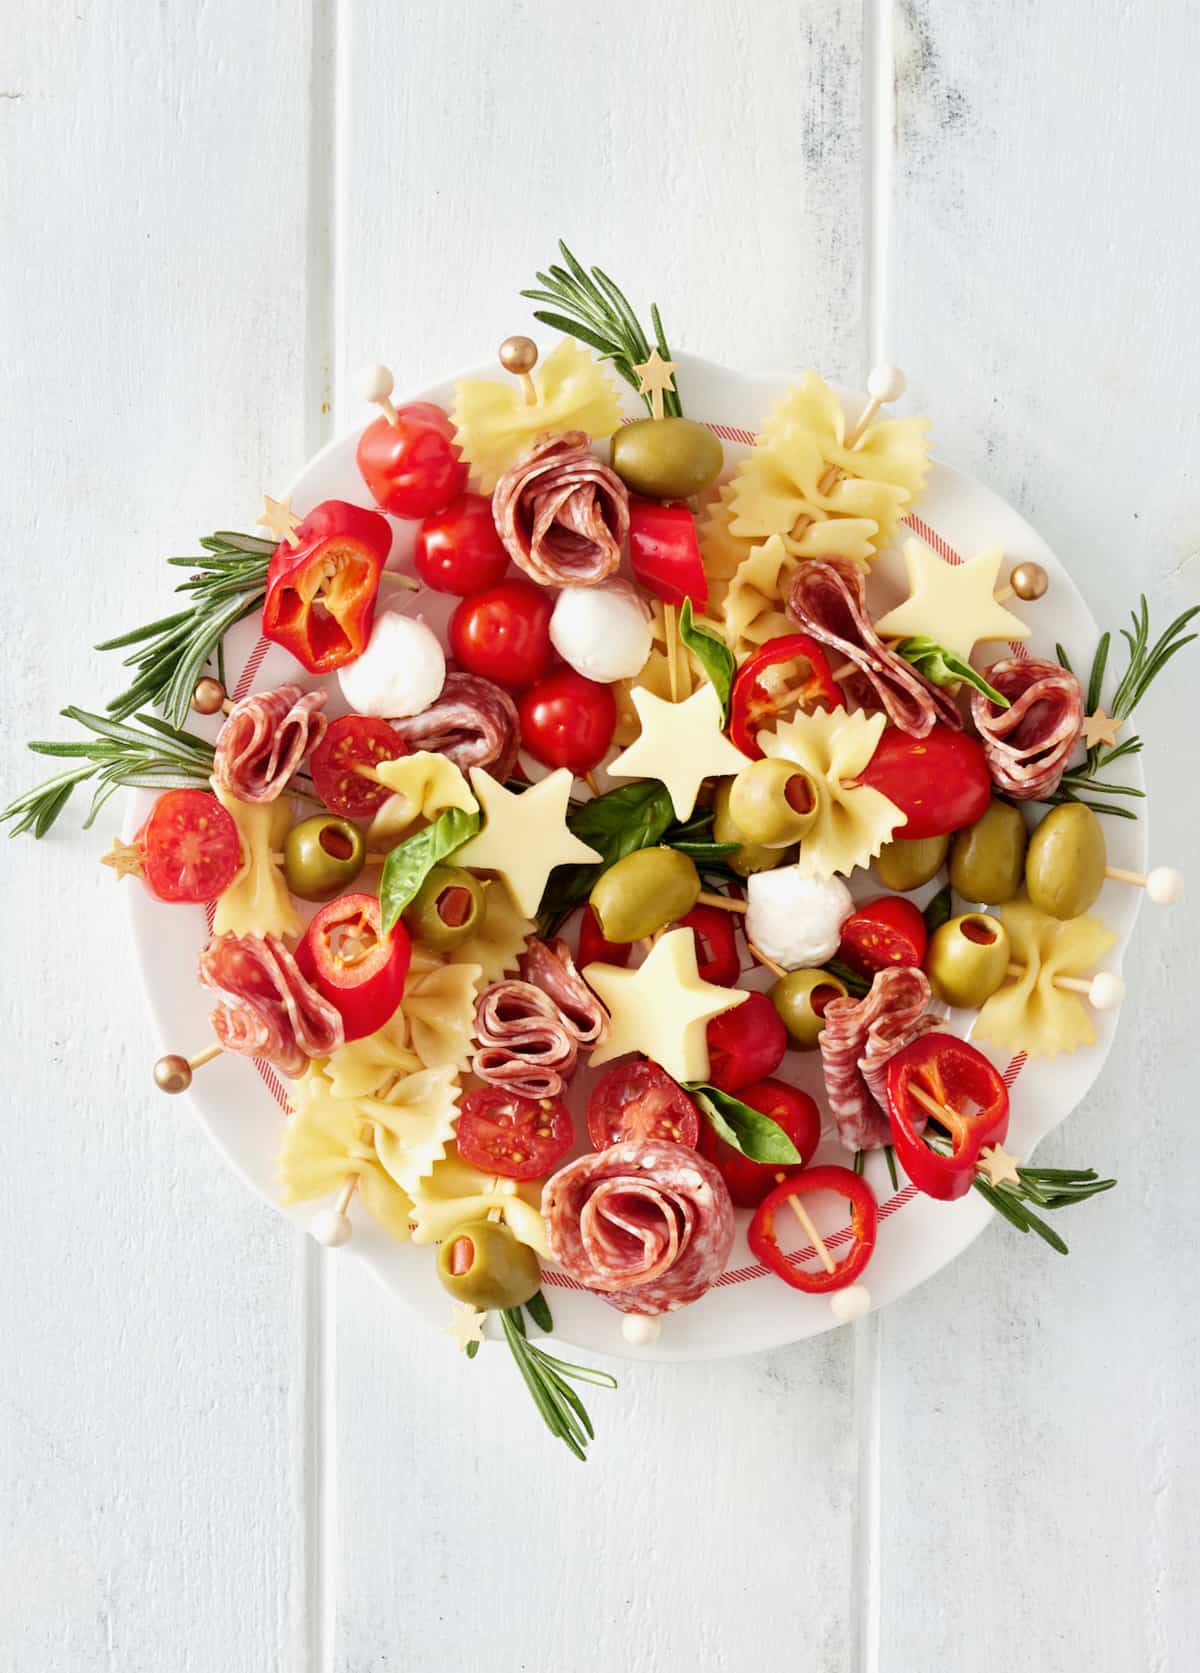 A large white serving plate with skewers made of meats, olives, peppers and cheeses laid out in a circle to look like a holiday wreath.